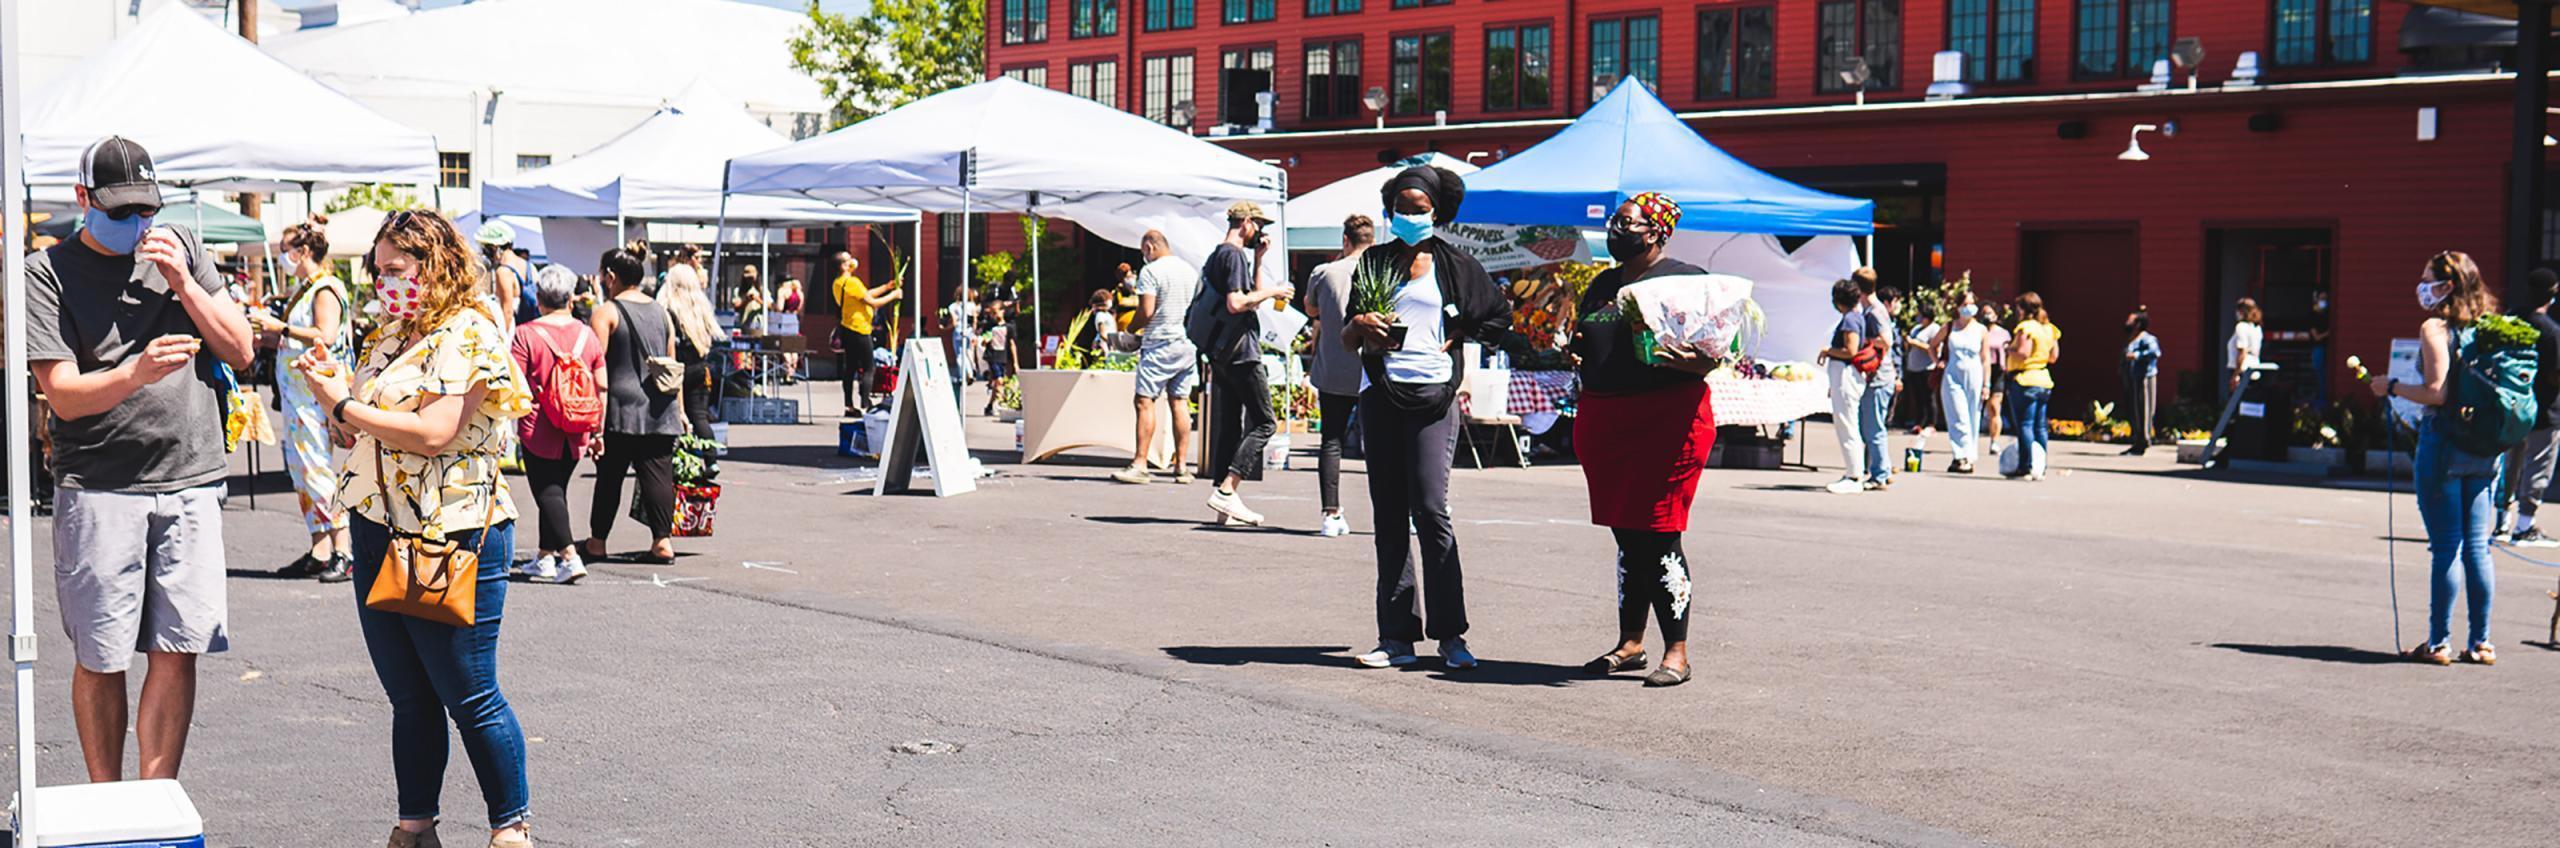 A photo of an outdoor market with customers walking around the asphalt plaza